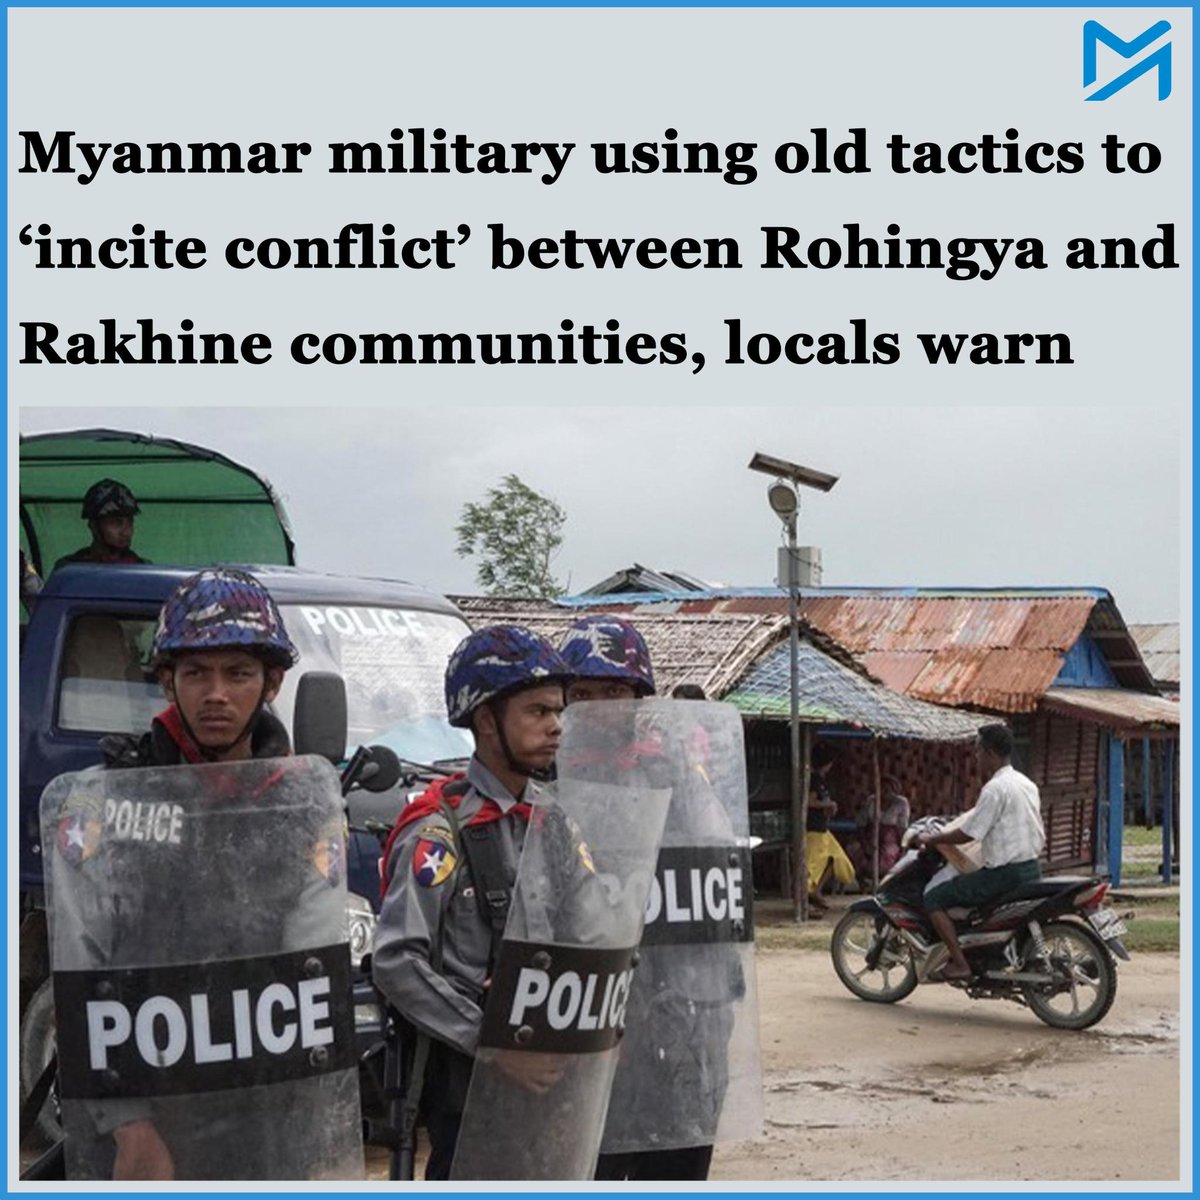 The junta is reportedly ordering Rohingya villagers in Sittwe to protest against the Arakan Army, threatening them with isolation and deprivation of basic commodities if they refuse to comply Read More : myanmar-now.org/en/news/myanma… #Myanmar